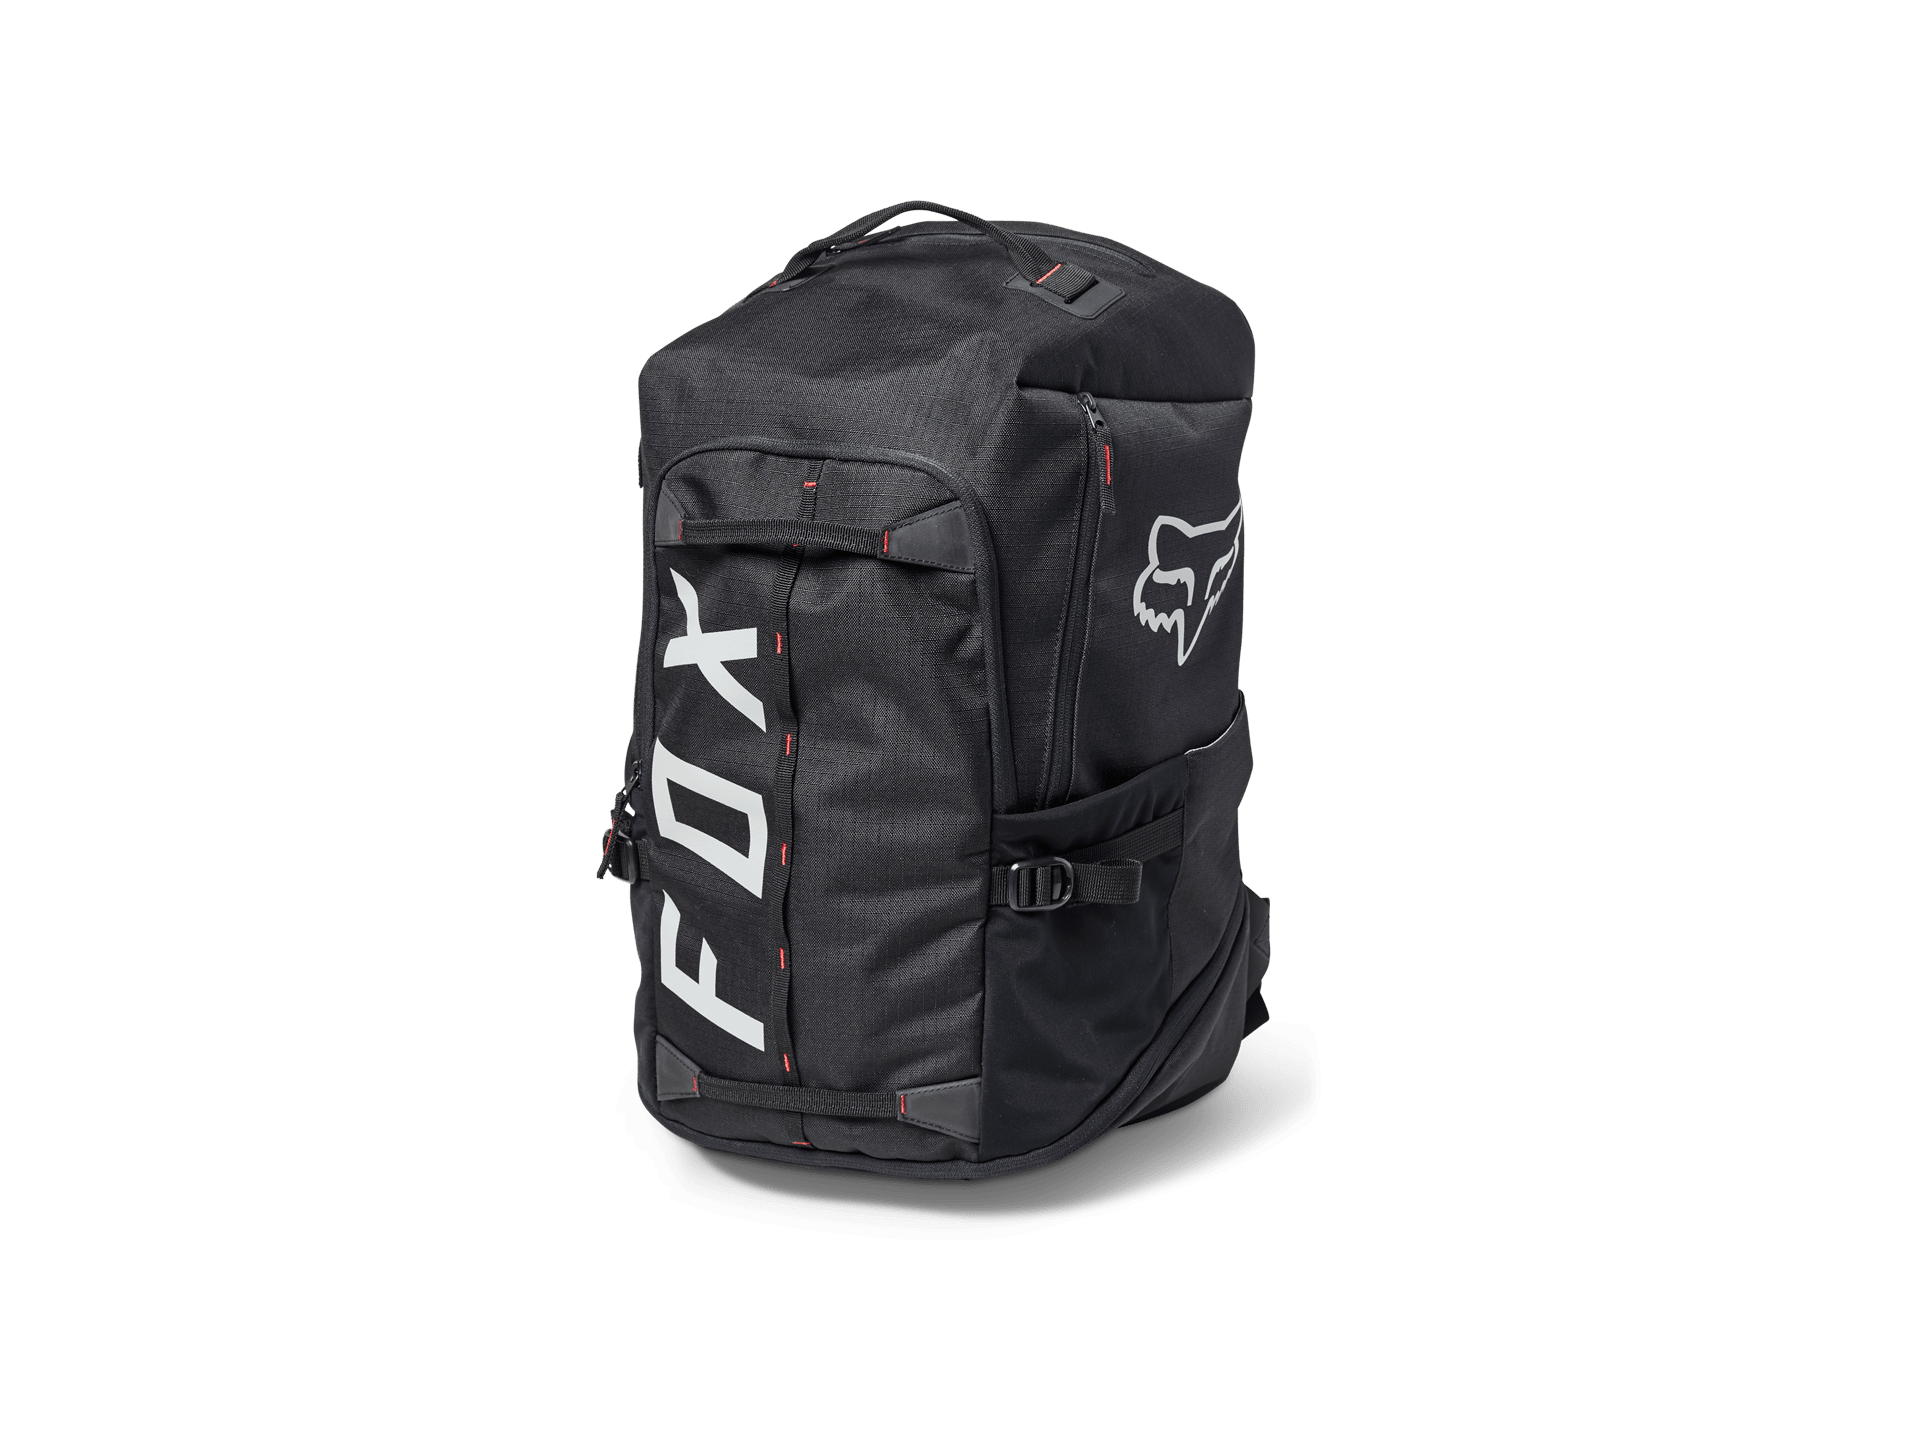 Fox Racing Transition Pack